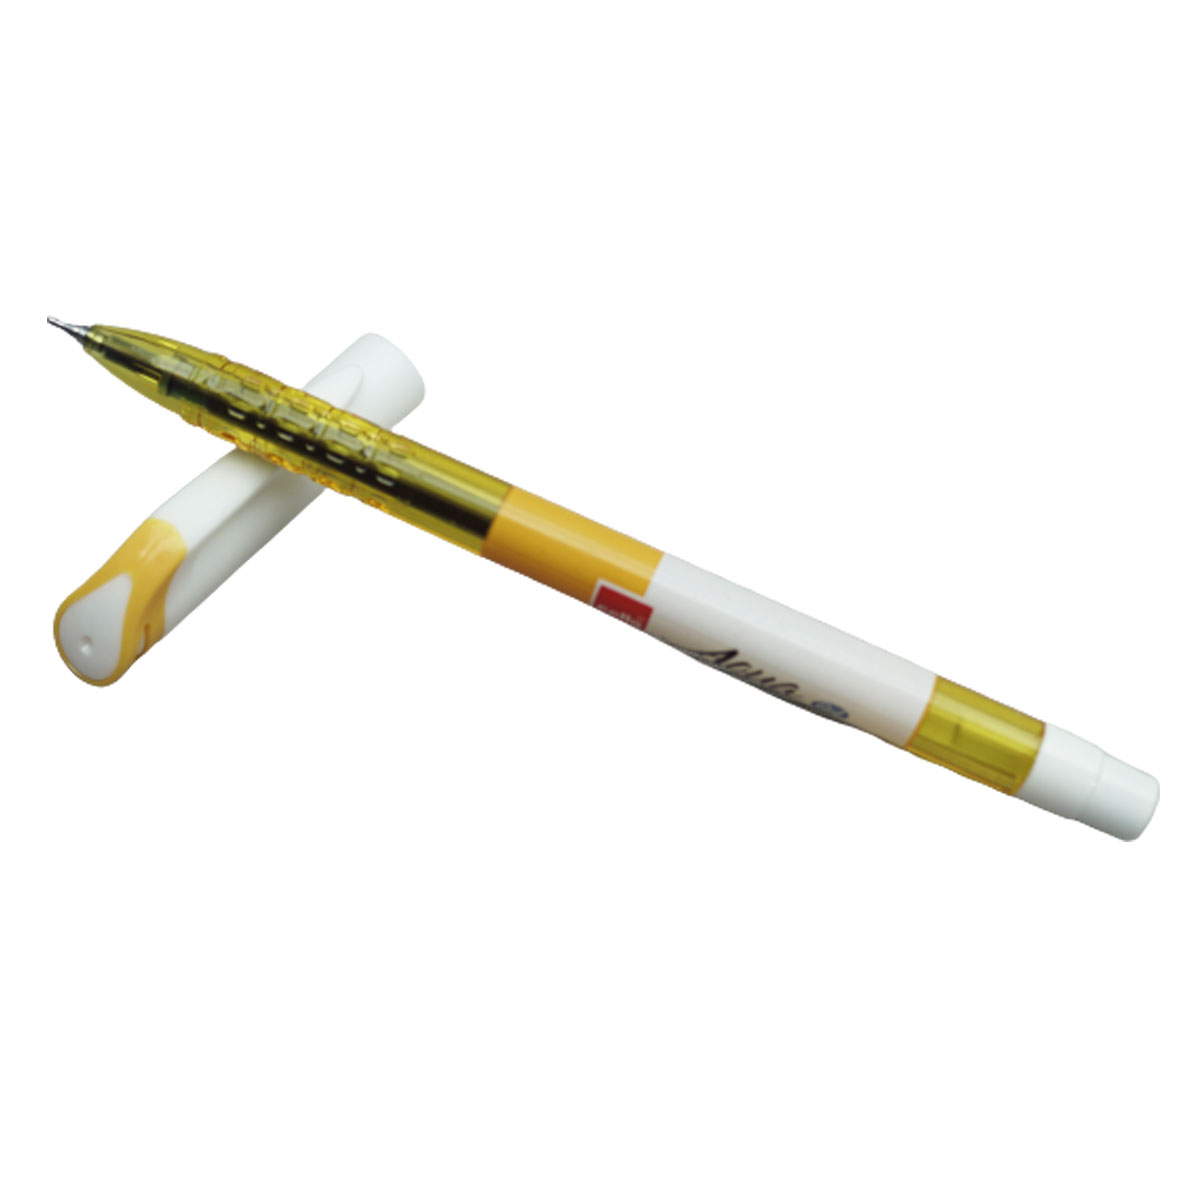 Cello Aqua Smooth White And Yellow Color Body With 0.6mm Blue Writing Gel Pen SKU 19986